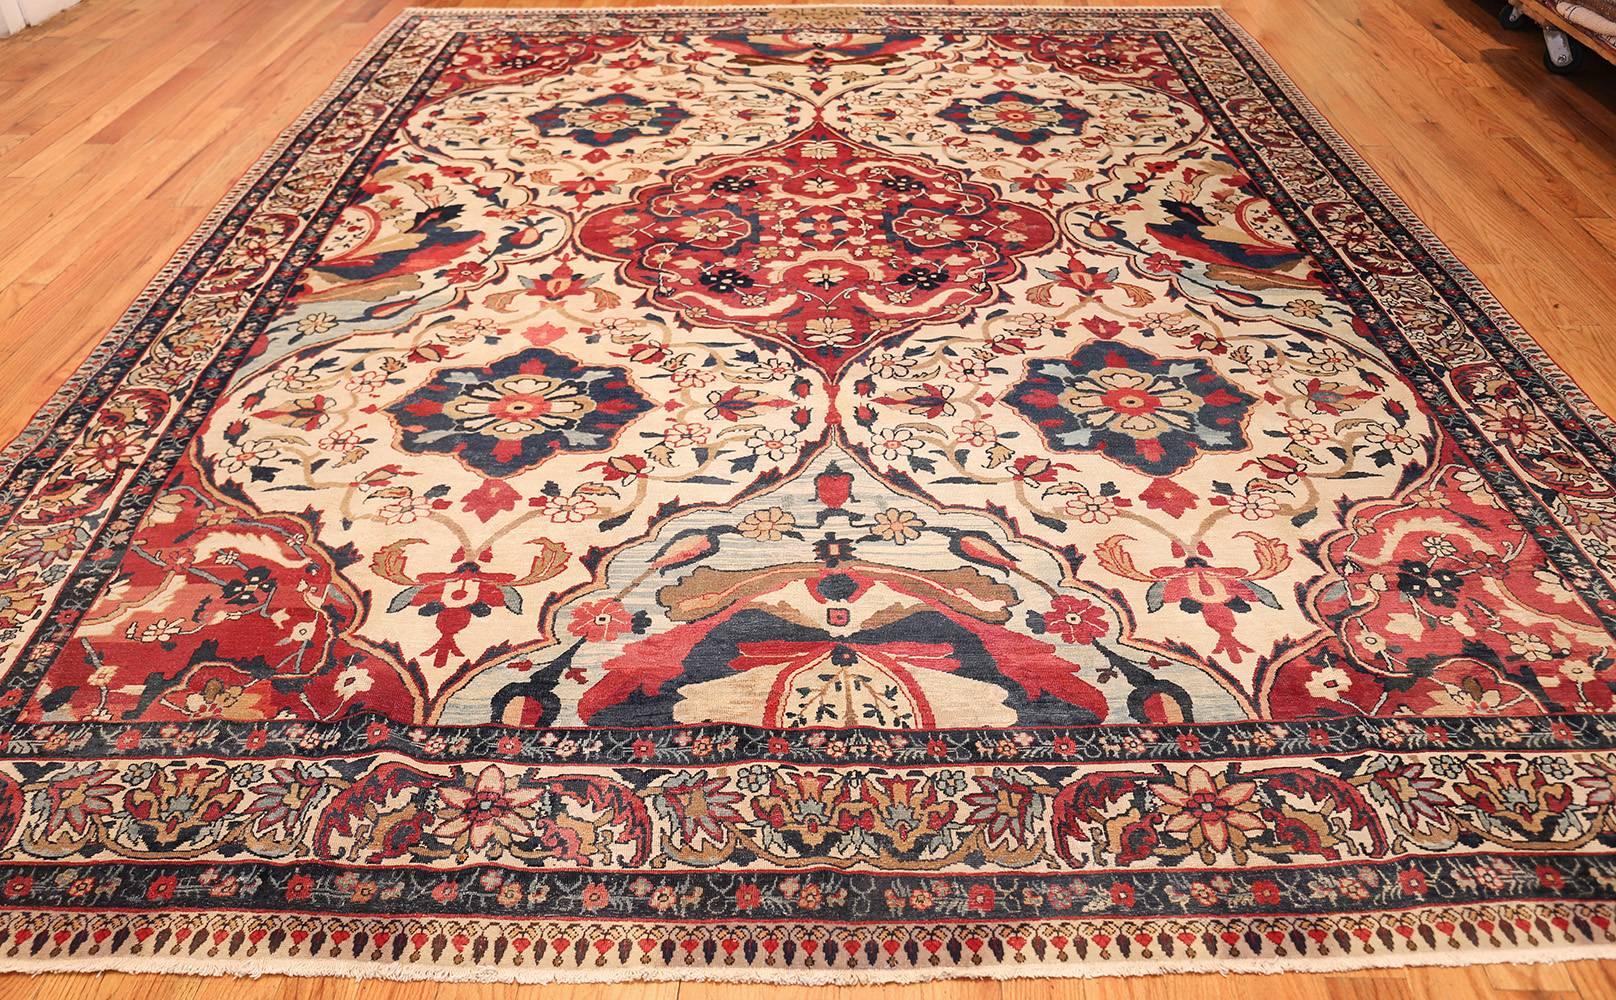 19th Century Antique Persian Kerman Rug. Size: 9 ft x 11 ft 6 in (2.74 m x 3.51 m)